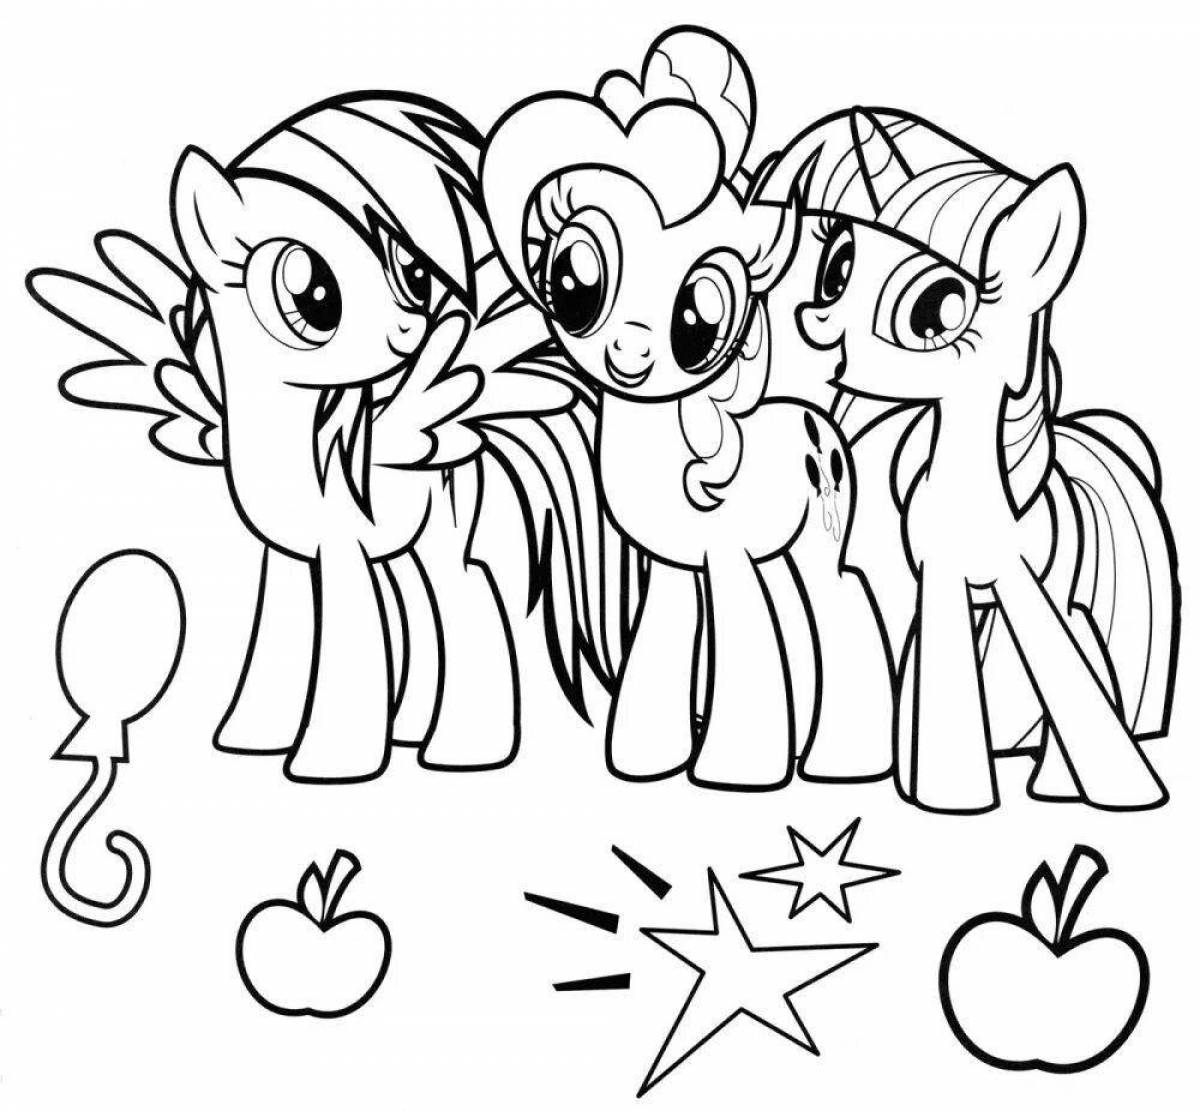 Exquisite pony friendship coloring book